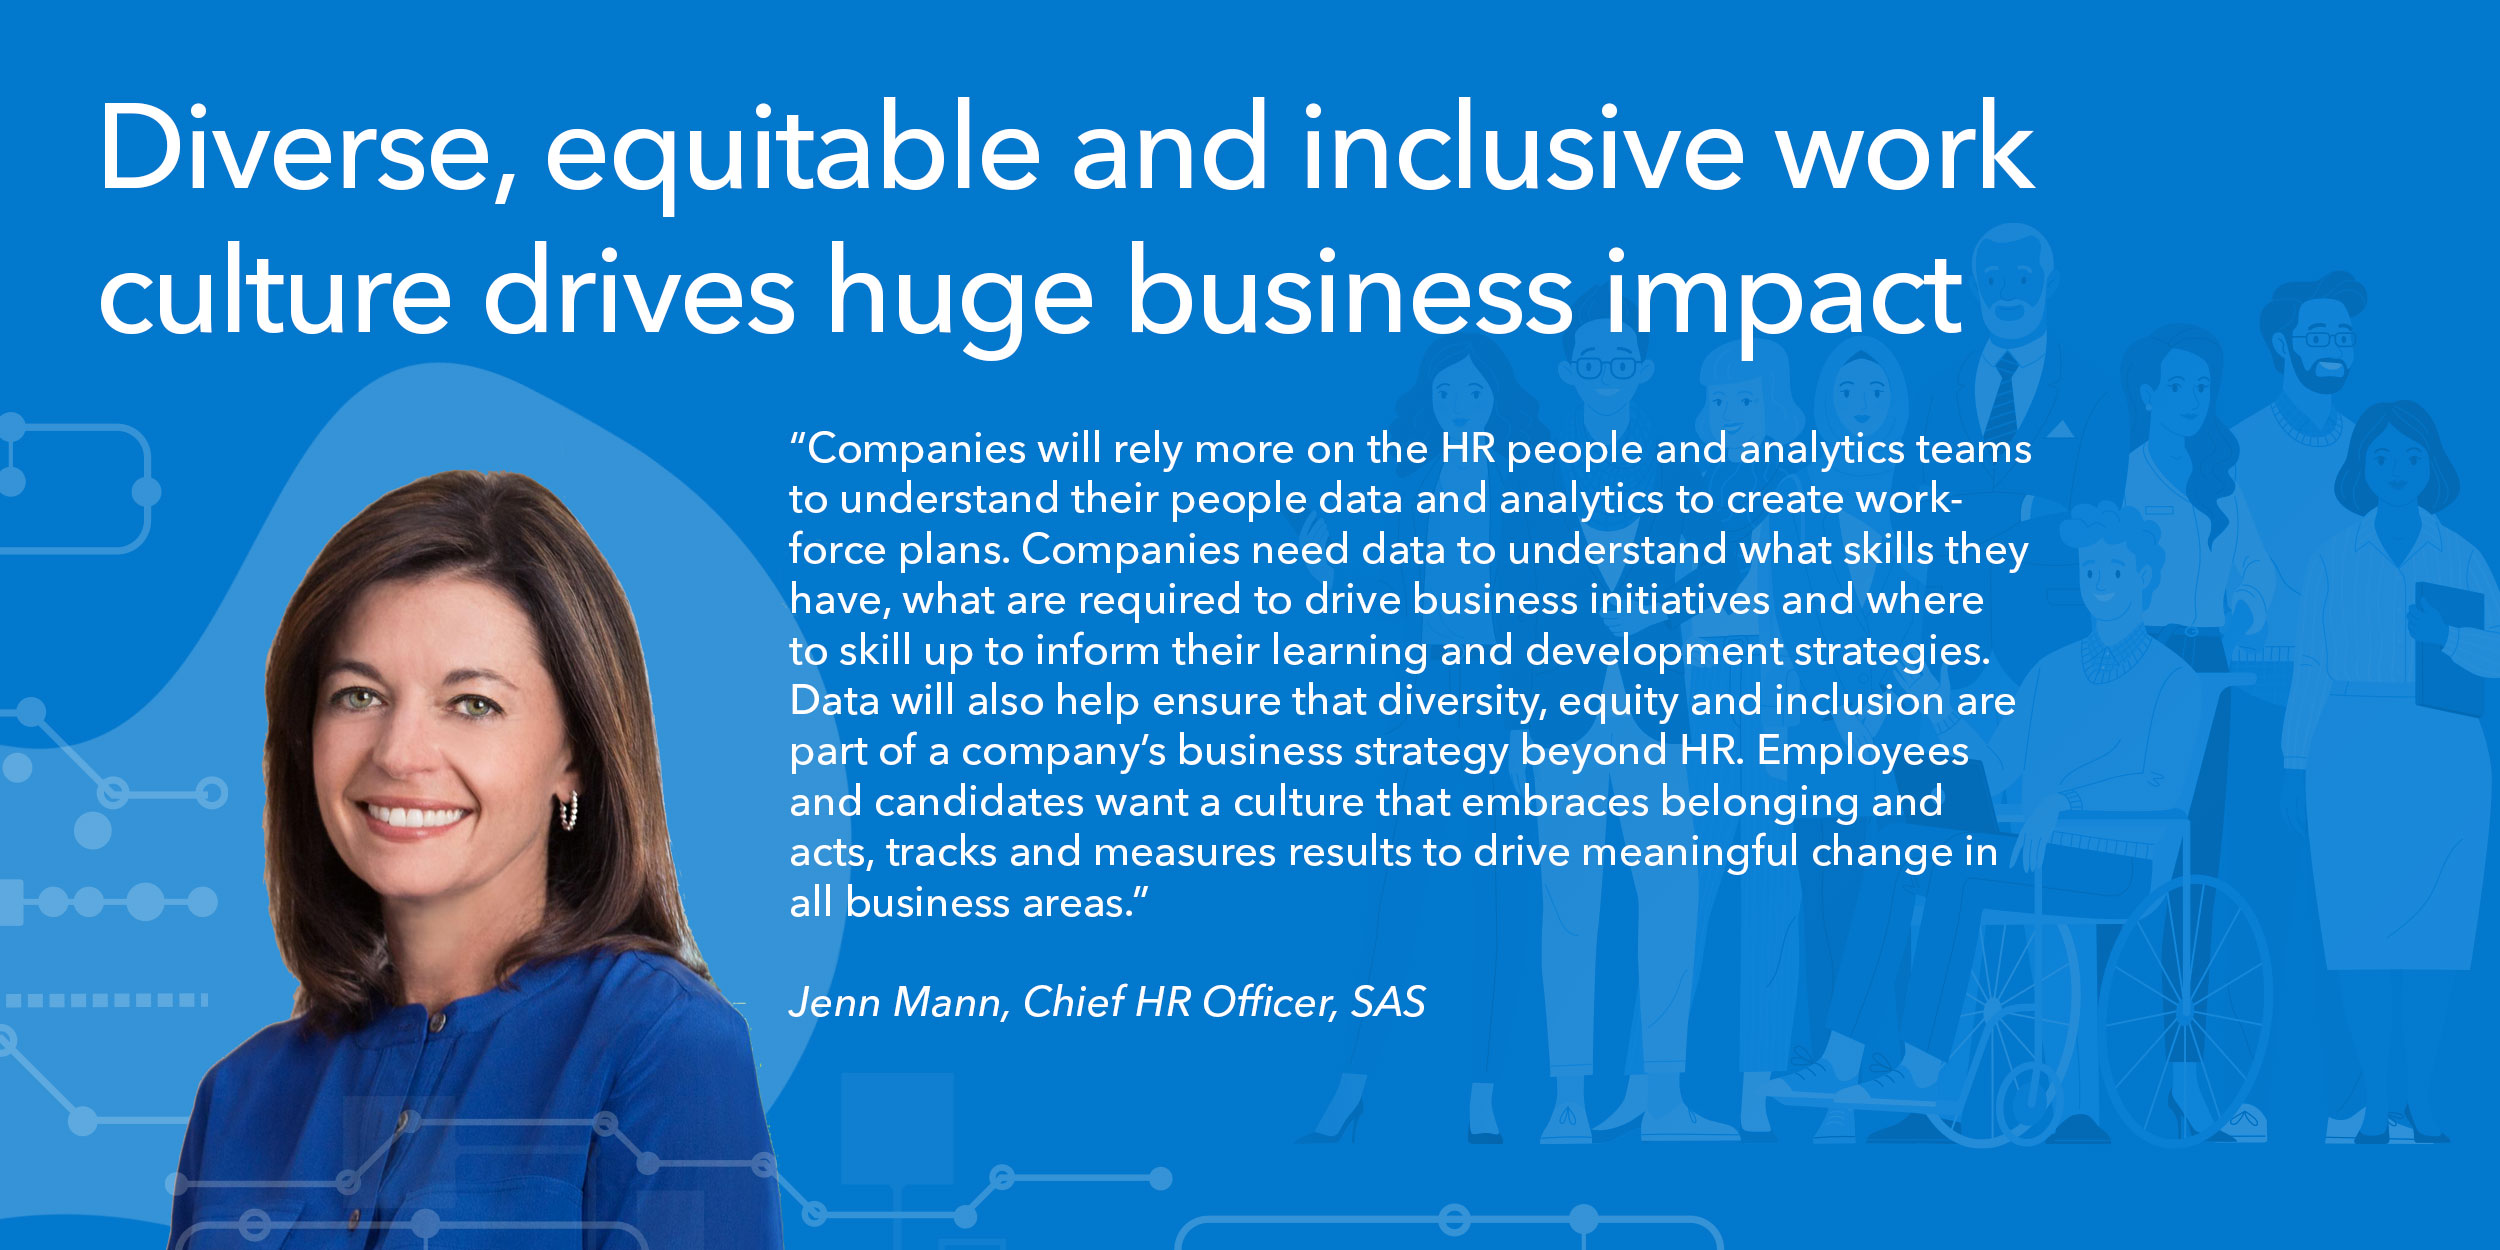 Companies will rely more on the HR people and analytics teams to understand their people data and analytics to create workforce plans. Companies need data to understand what skills they have, what are required to drive business initiatives and where to skill up to inform their learning and development strategies. Data will also help ensure that diversity, equity and inclusion are part of a company’s business strategy beyond HR. Employees and candidates want a culture that embraces belonging and acts, tracks and measures results to drive meaningful change in all business areas.